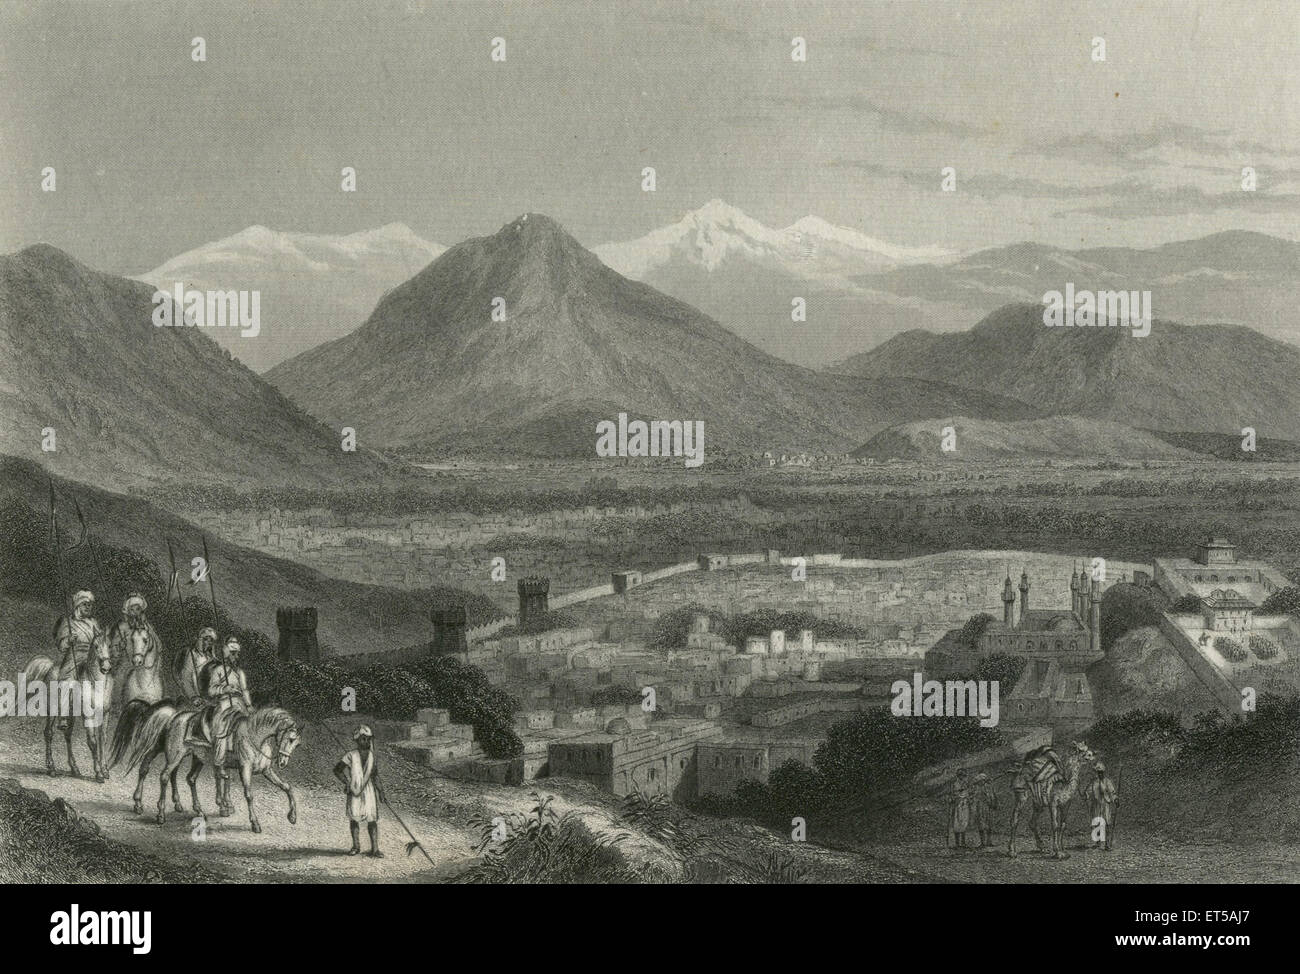 CABUL ; Kabul ; fort and mosque ; Afghanistan ; old vintage 1800s engraving Stock Photo